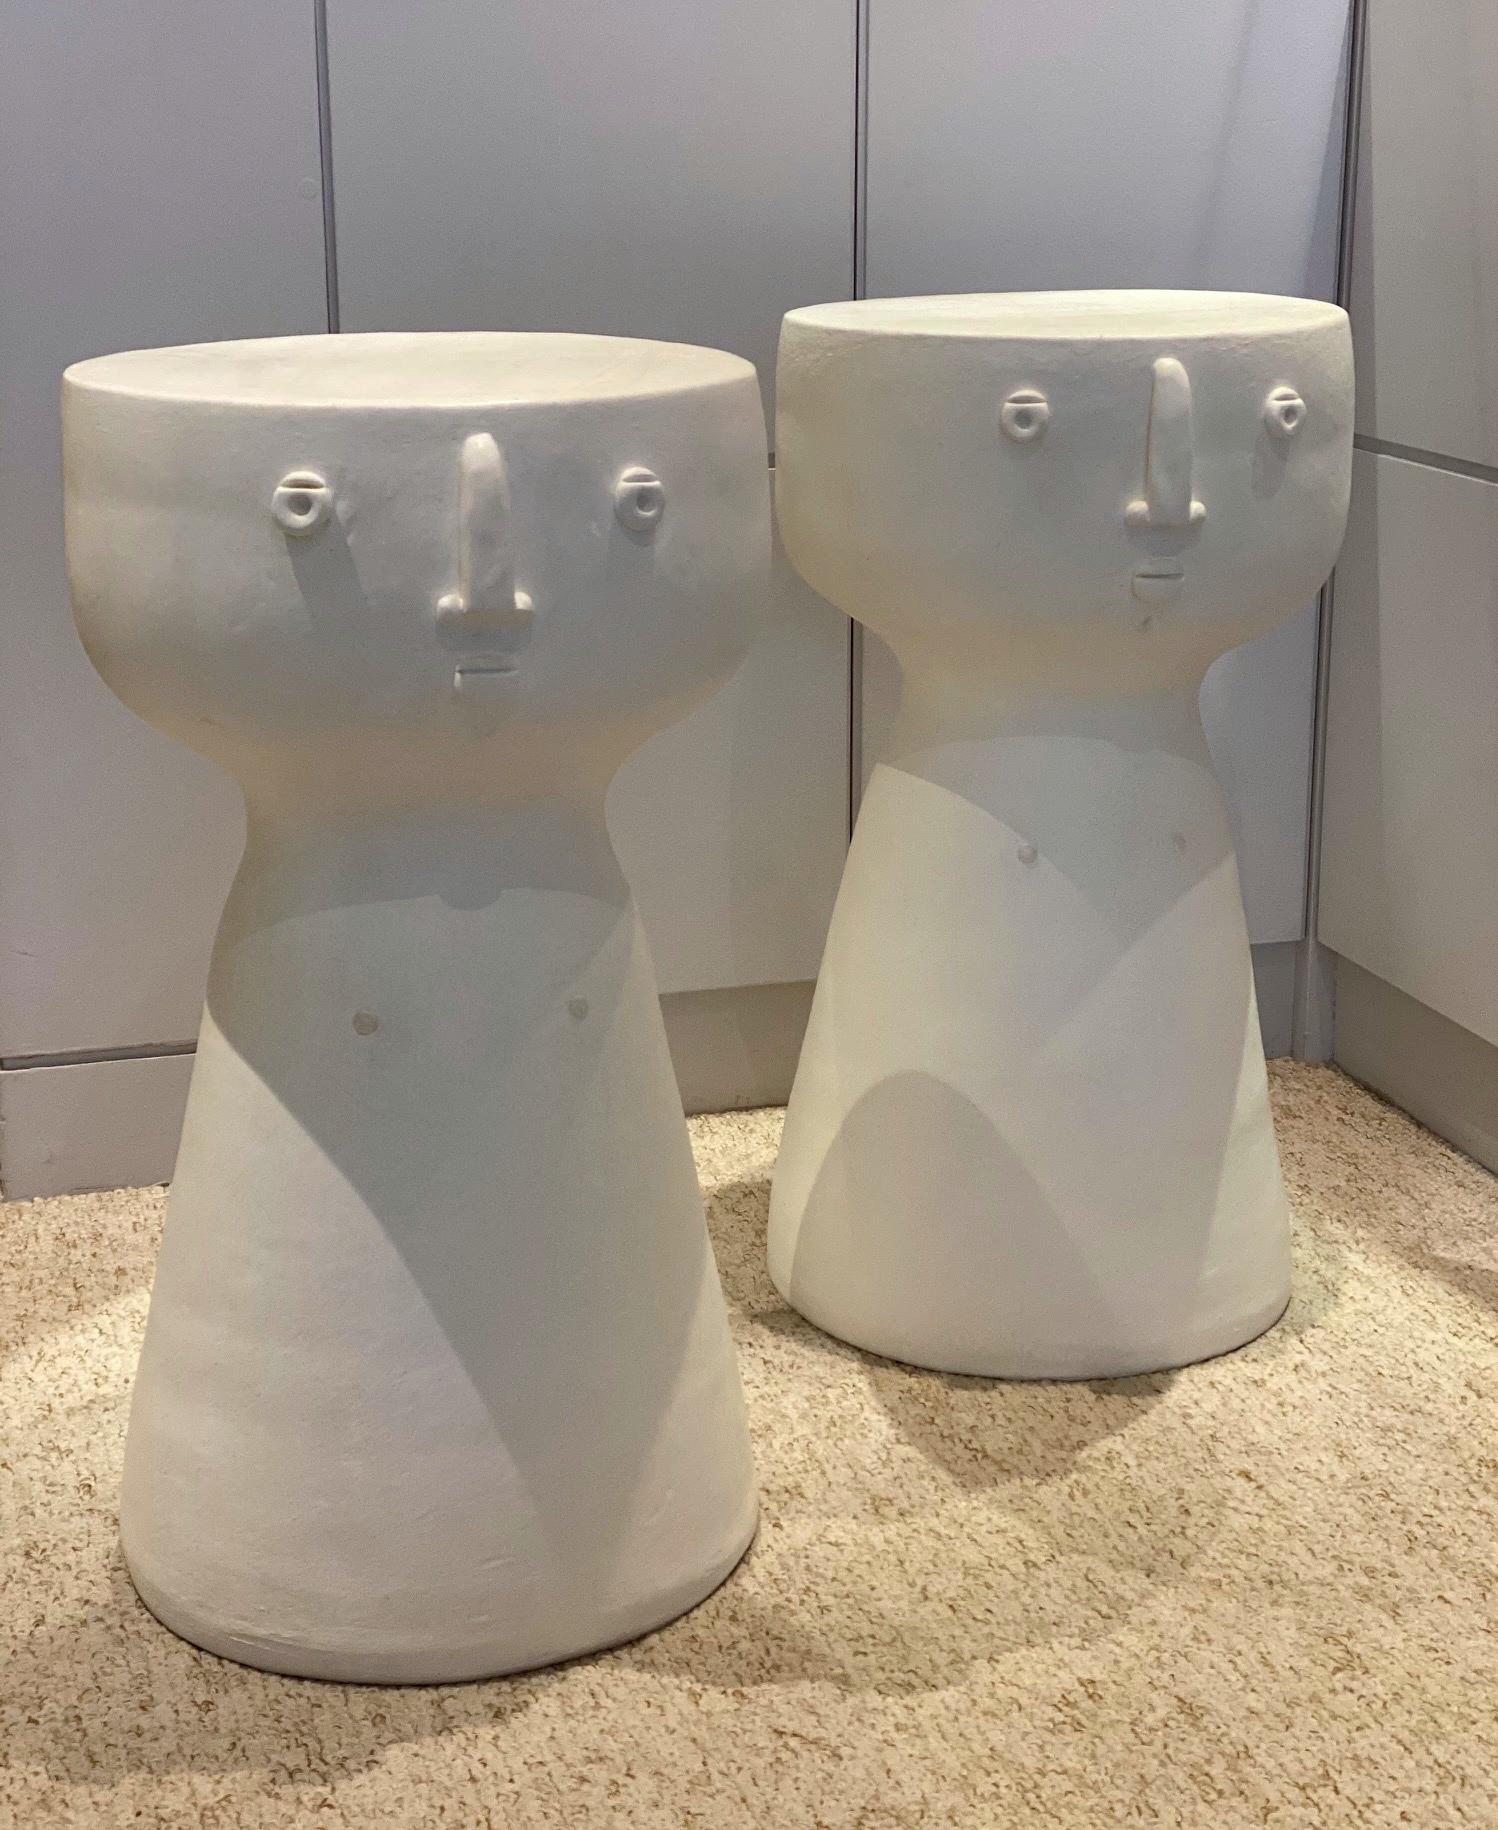 Pair of earthenware white glazed stools (or side tables) with faces engraved, 2021.
Unique hand-sculpted pieces, signed by the French ceramicists DALO.